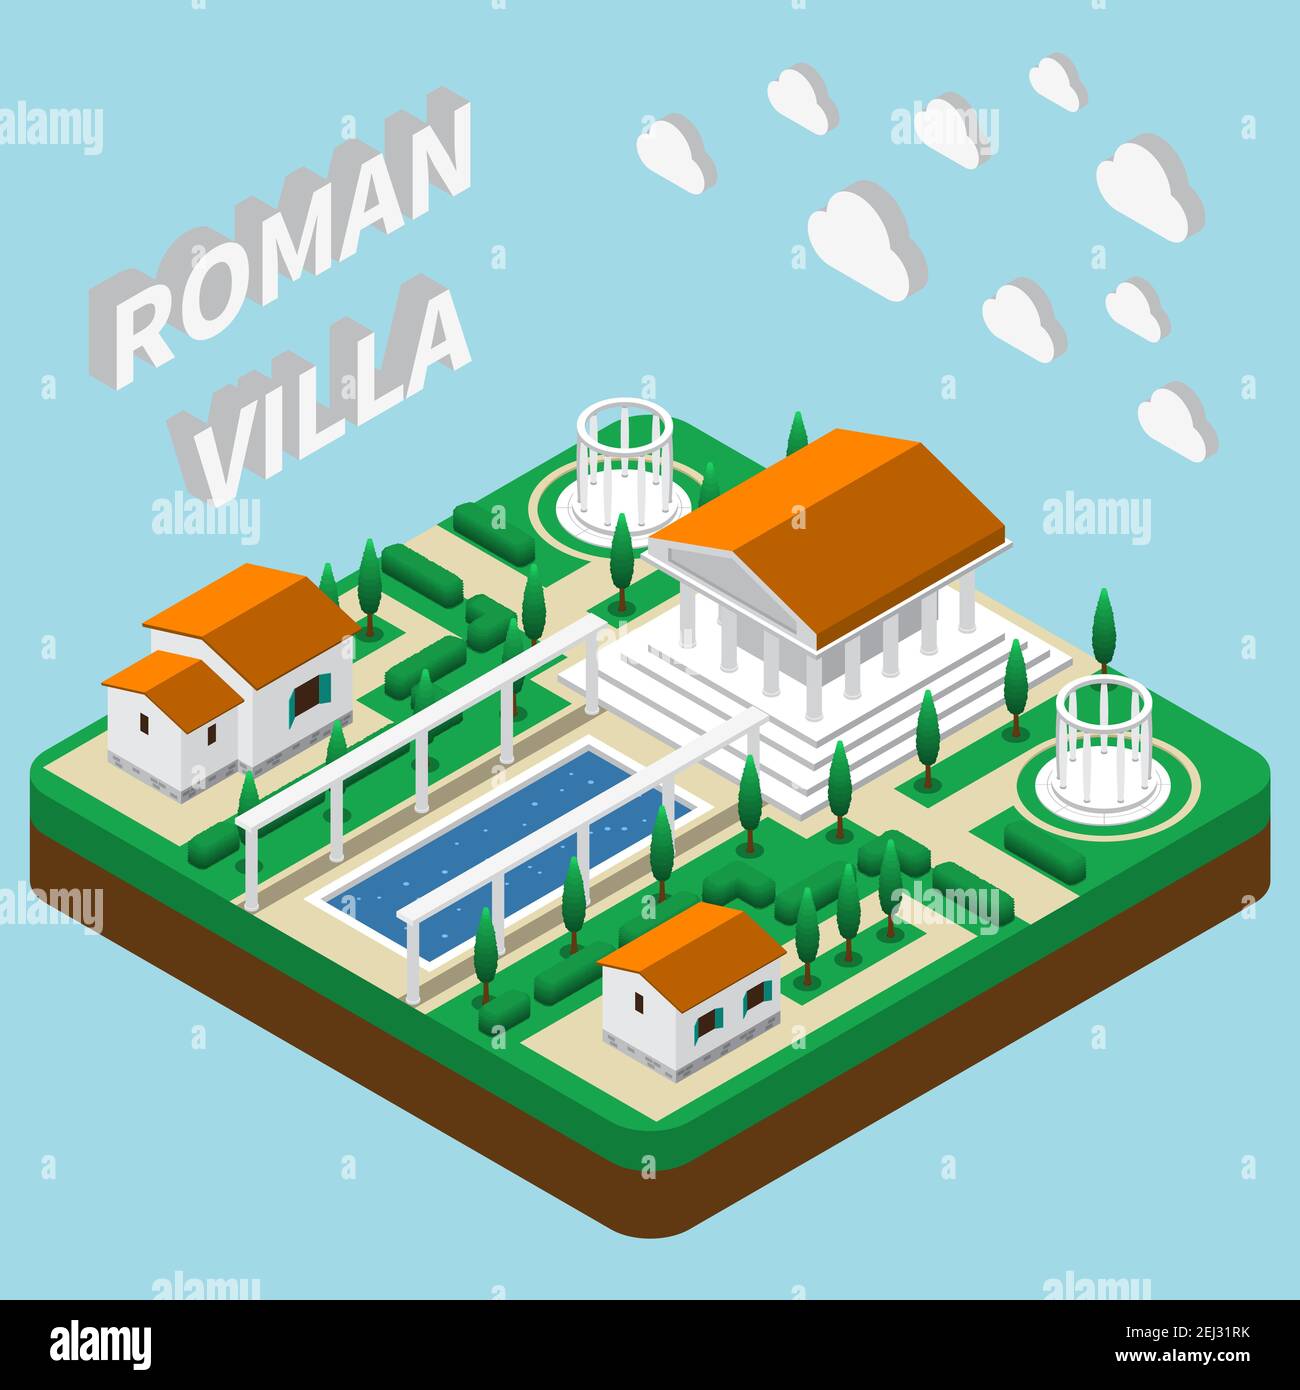 Isometric house composition with cumbersome clouds text and images of pantheon style buildings with park grounds vector illustration Stock Vector